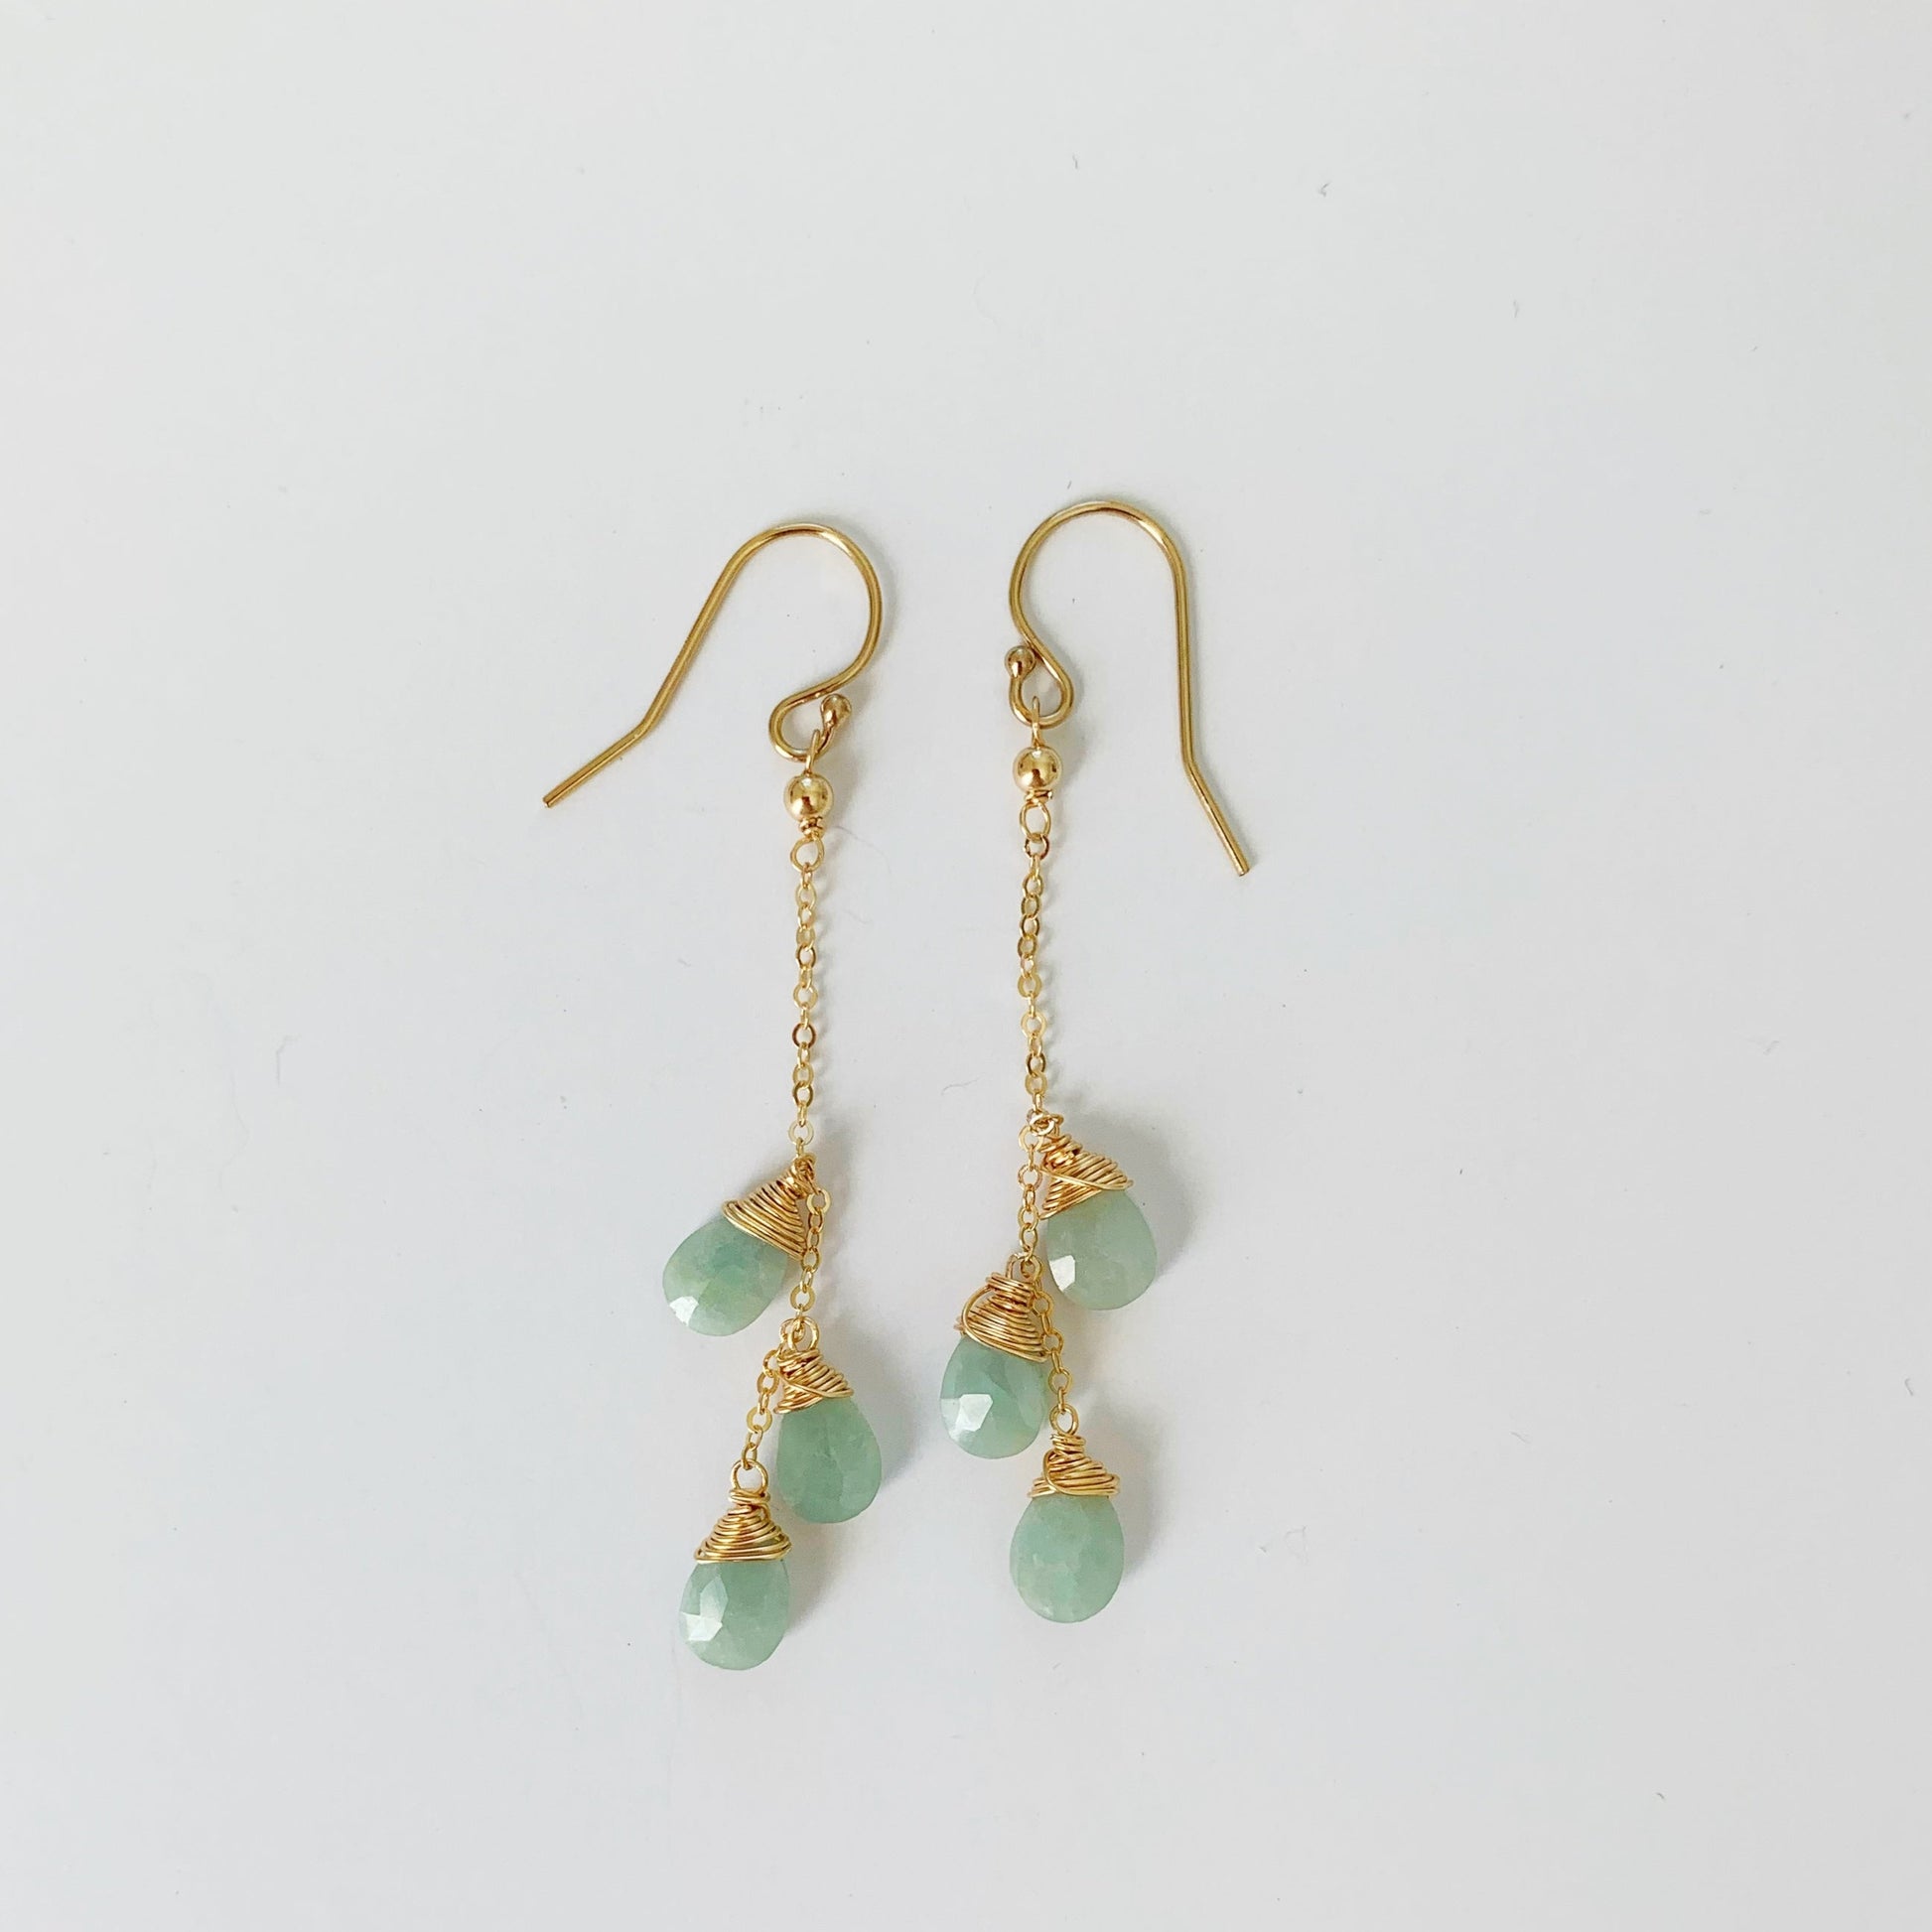 Raindrop aquamarine and 14k gold filled wire wrapped linear earrings by mermaids and madeleines. this pair is pictured on a white surface